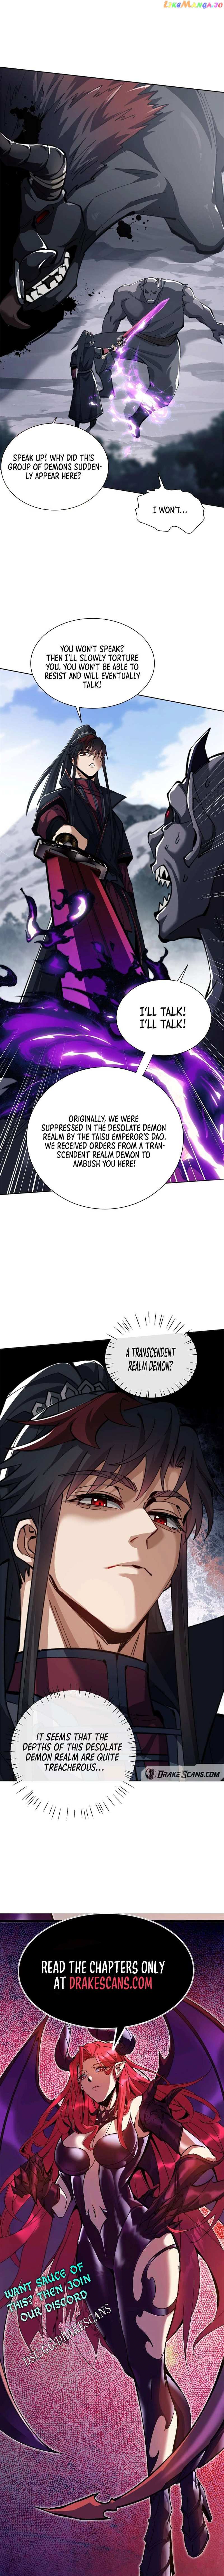 Master: This rebellious disciple is definitely not the Holy Son Chapter 17 - page 24